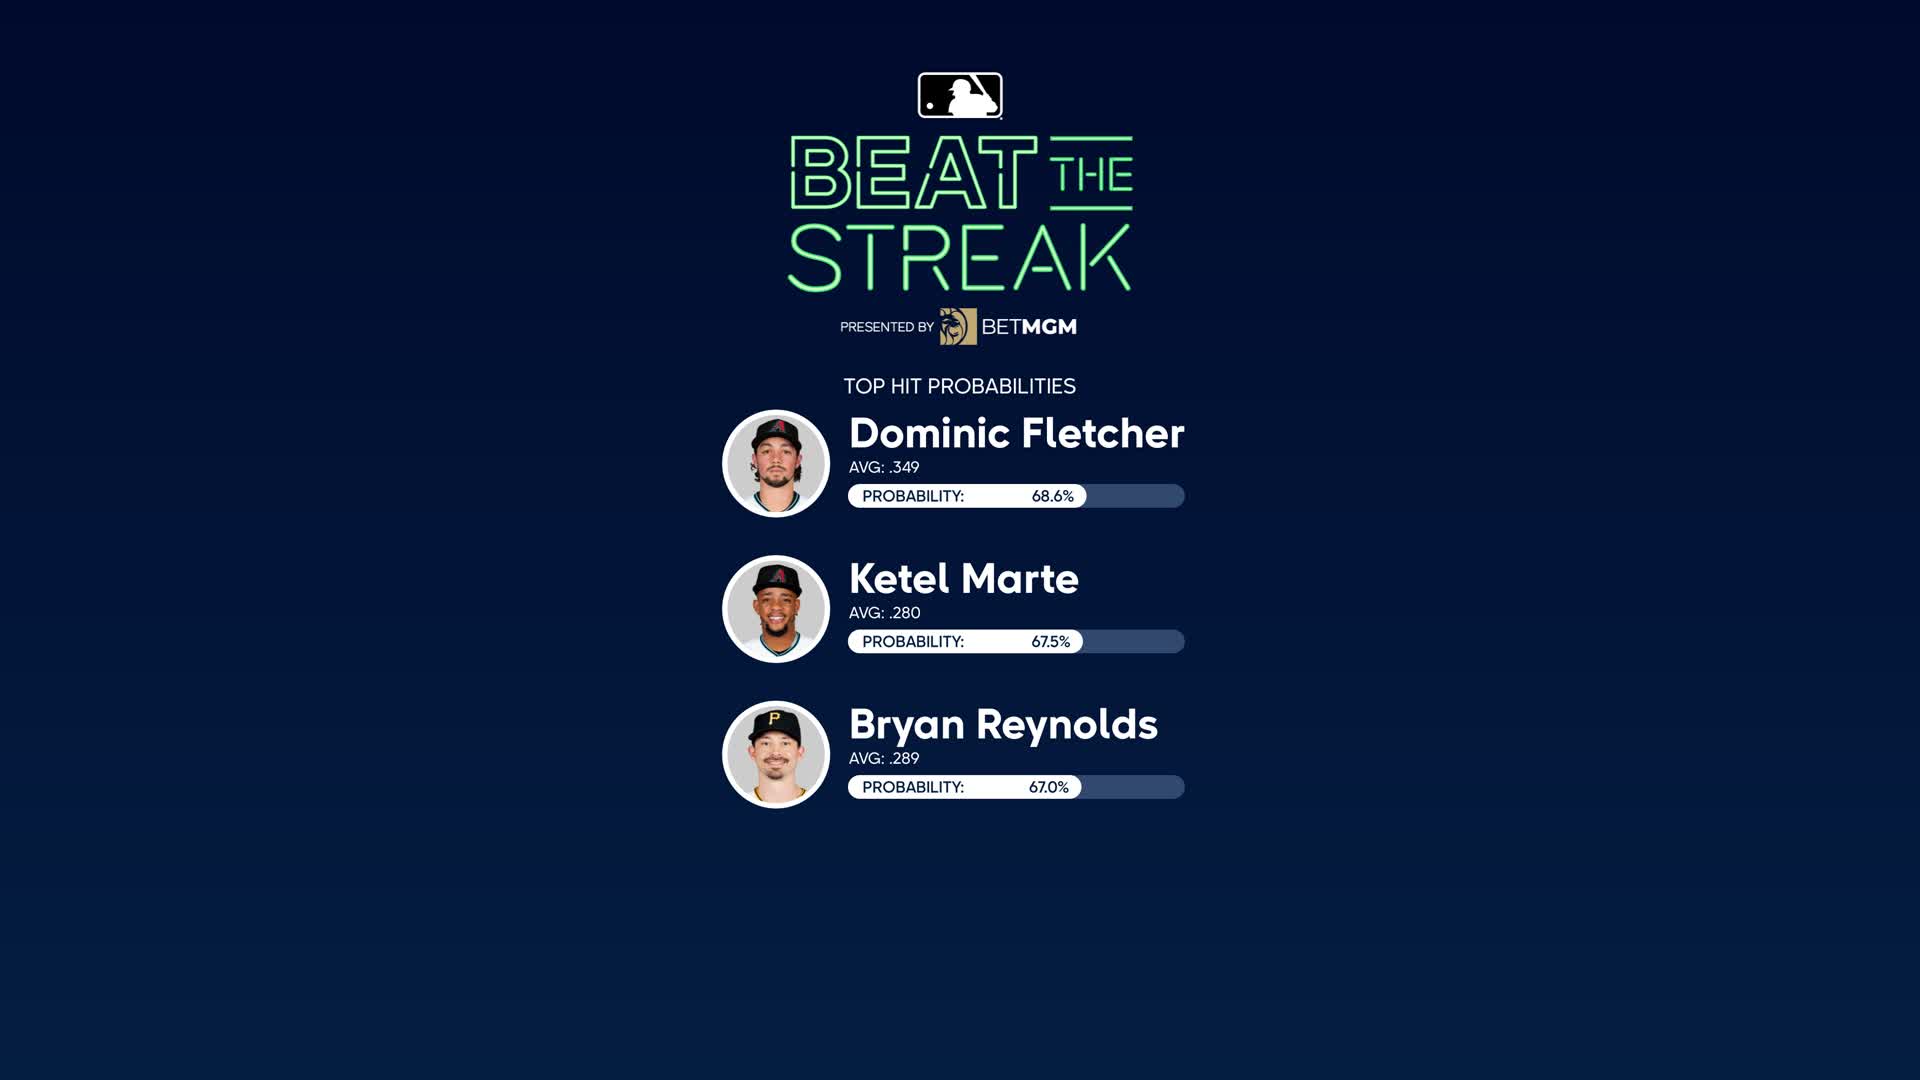 Discover Crypto on Instagram: You think the Diamondbacks got a shot this  year? #mlb #sports Sign up using code BITBOY and receive a 200% bonus on  your first deposit up to $1,000💰